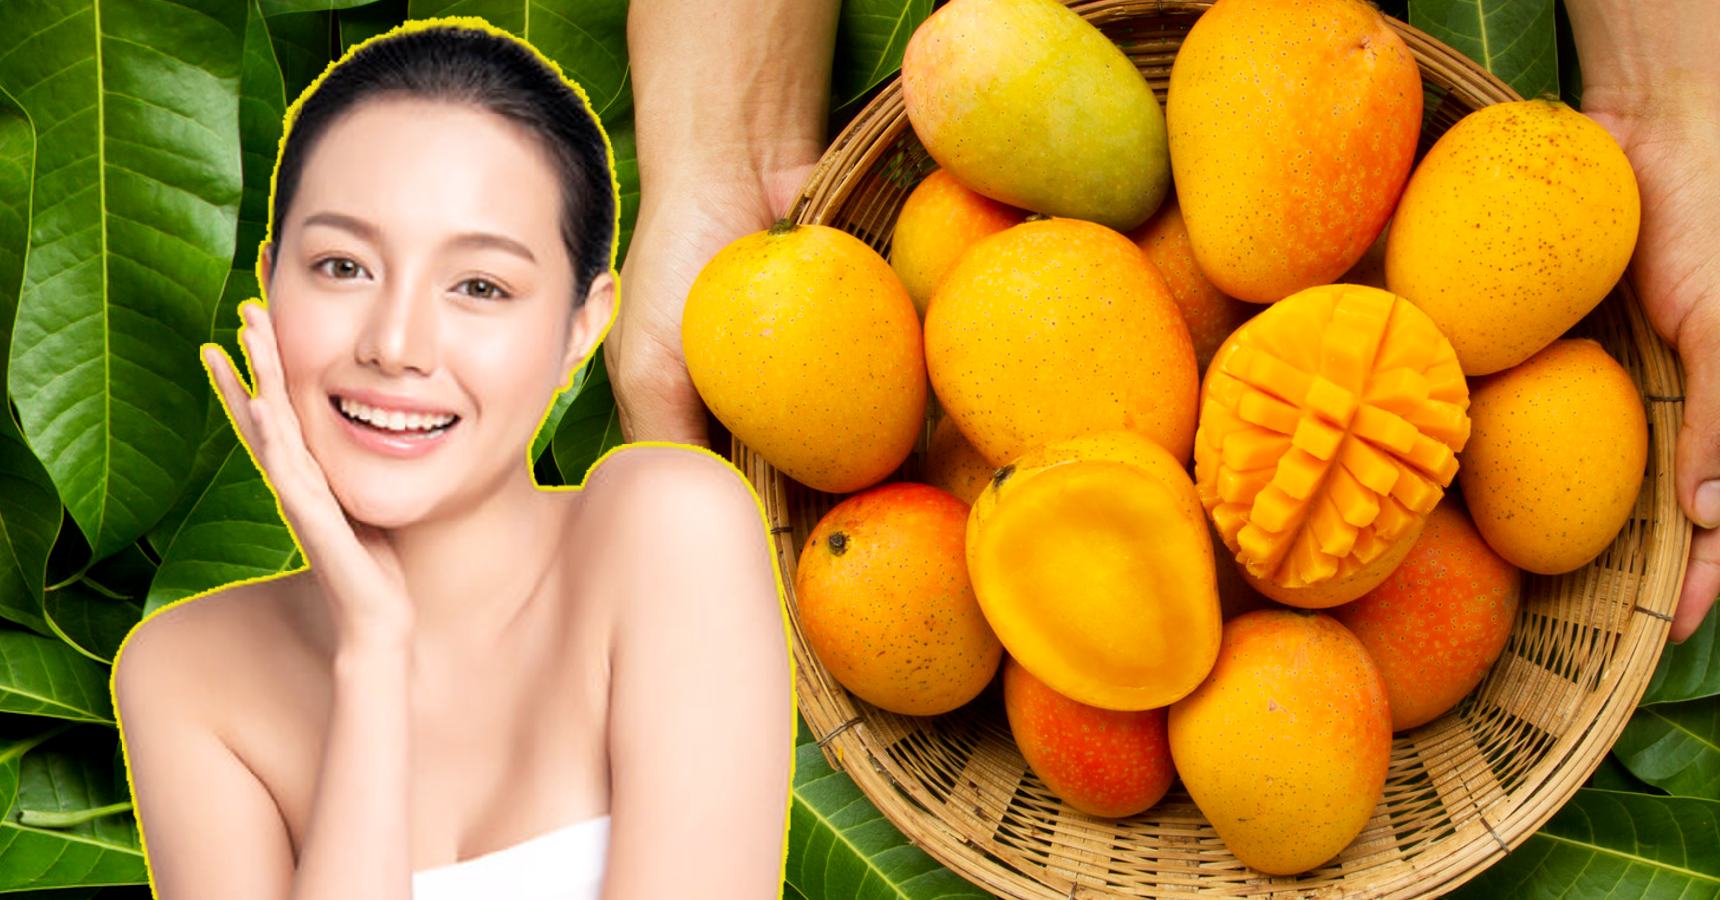 Skin care tips, try homemade mango face pack in this summer